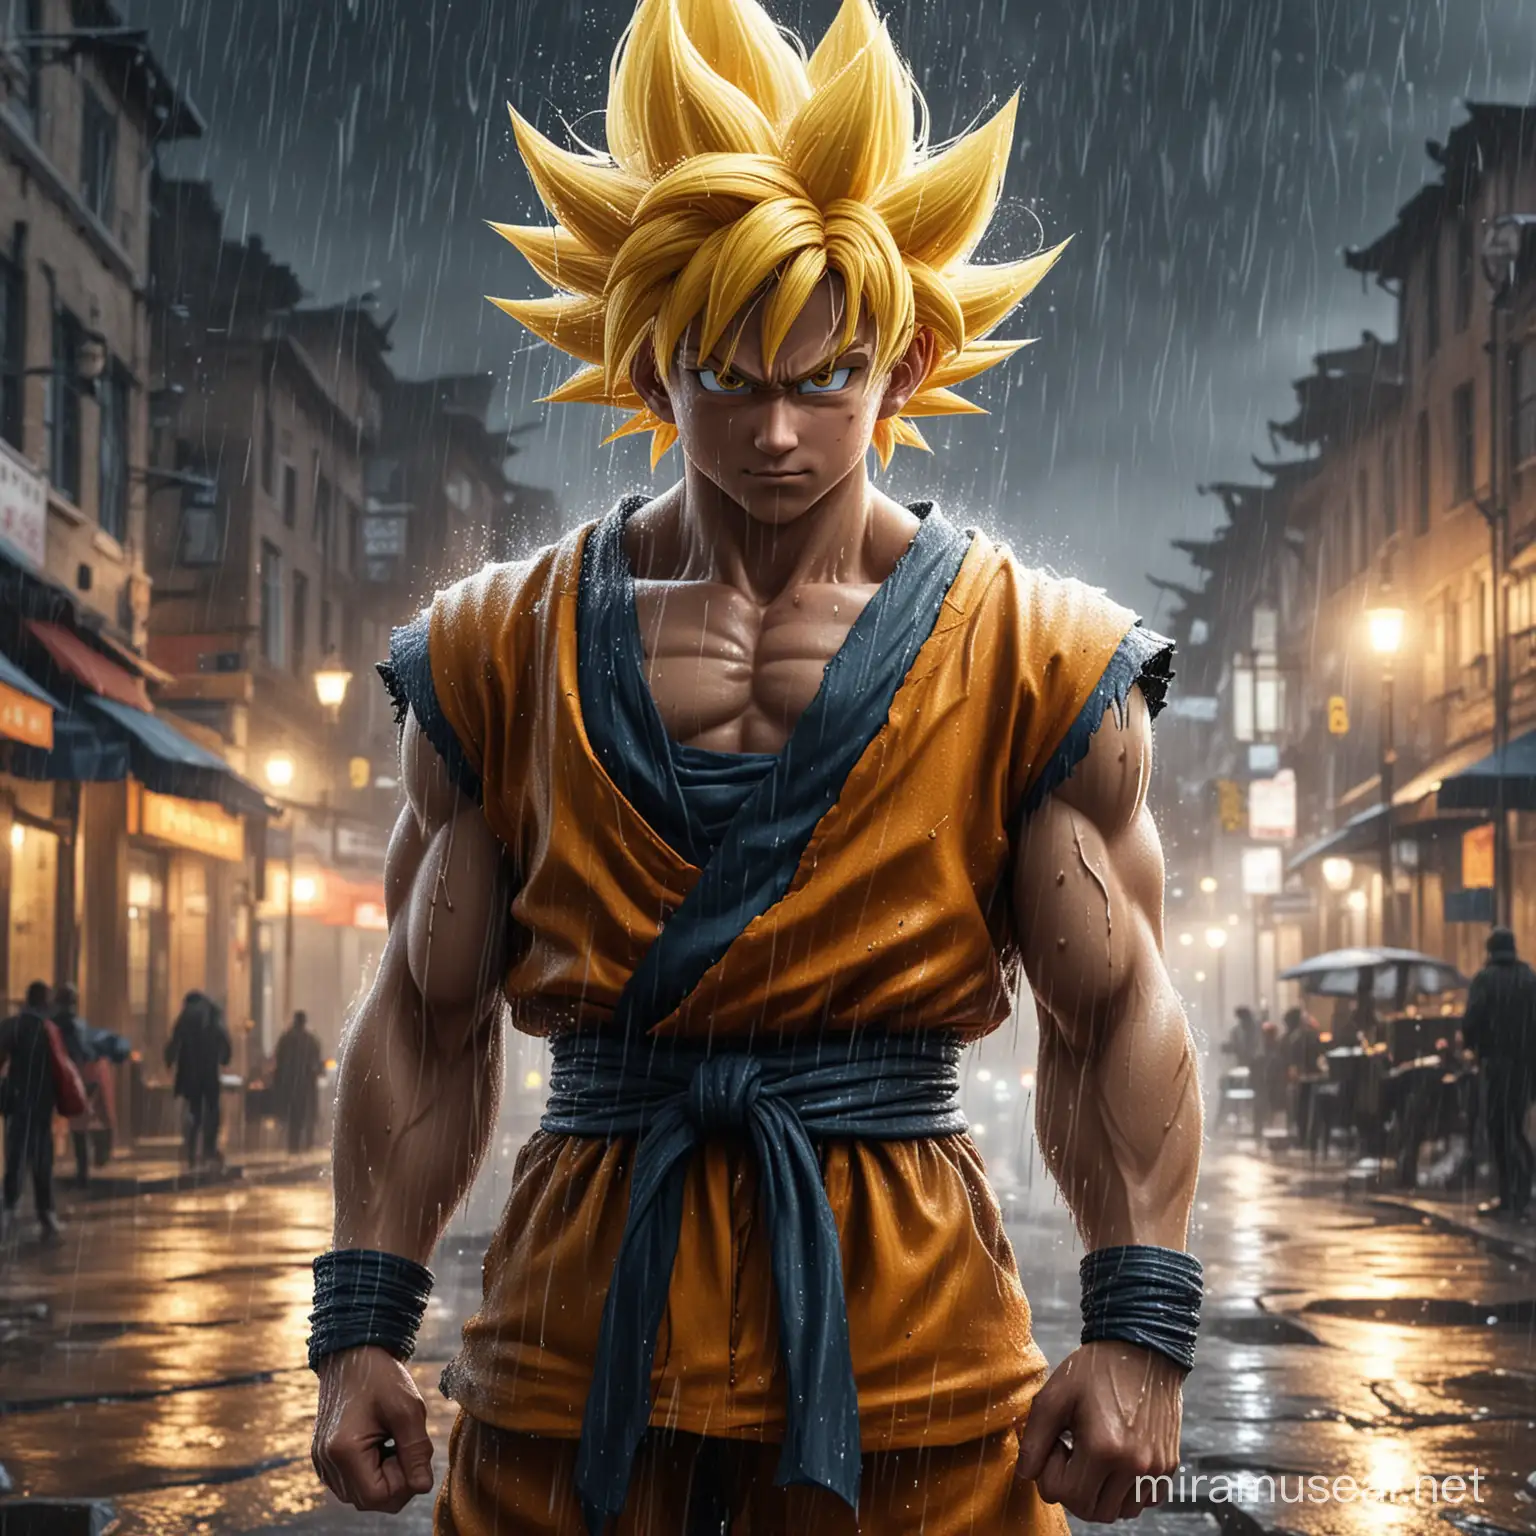 Goku in Epic Battle Amidst Old City Storm